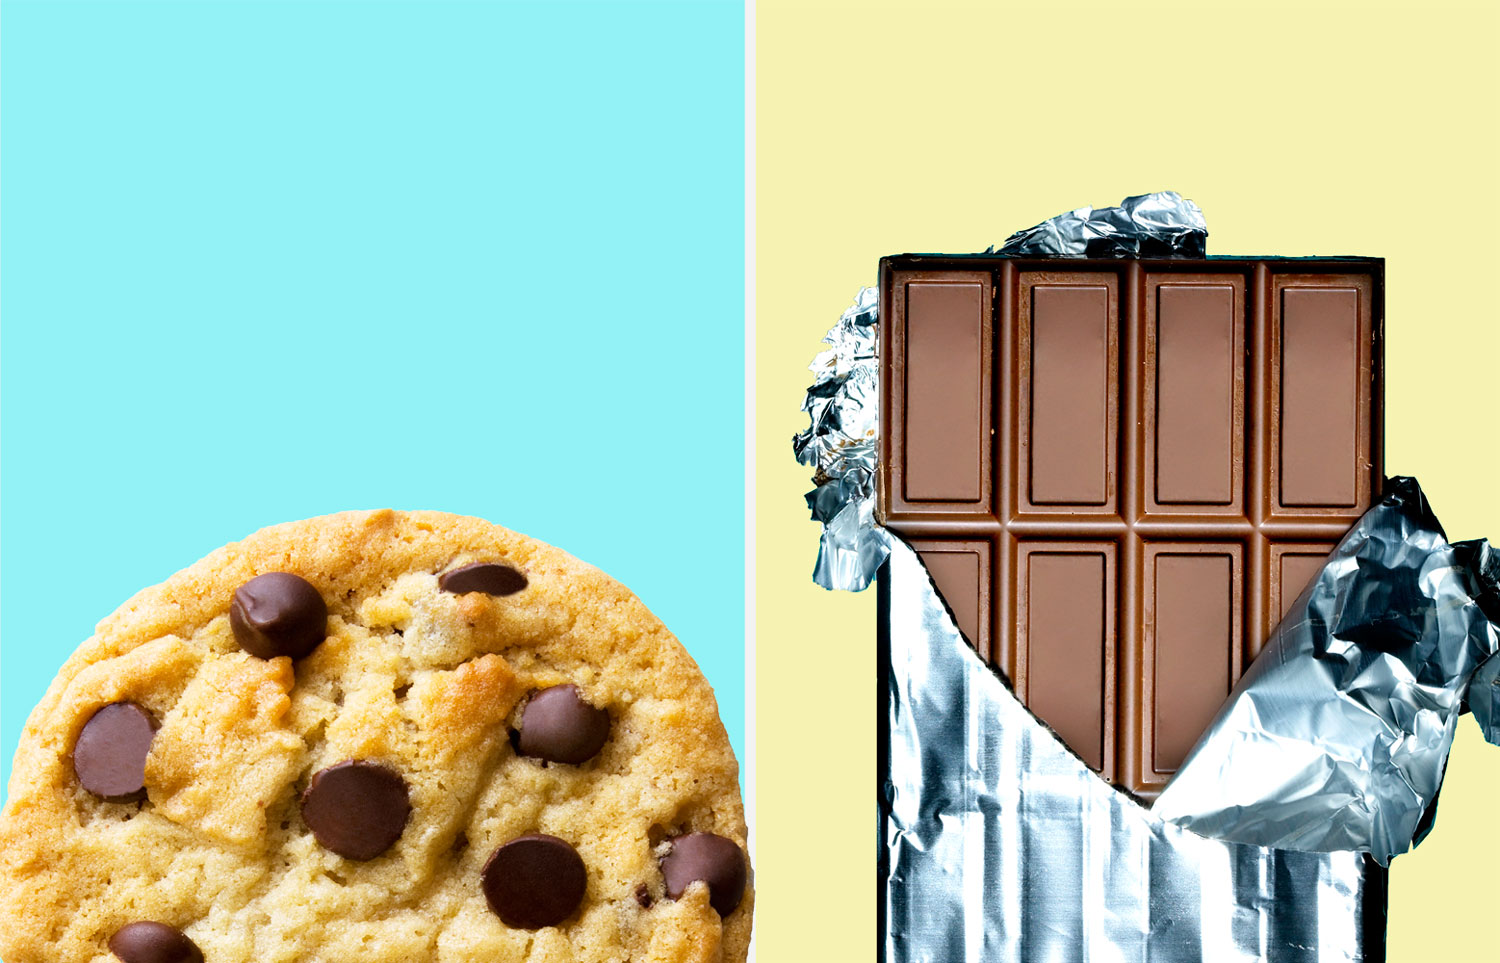 Which is better for you: A low fat cookie or dark chocolate?